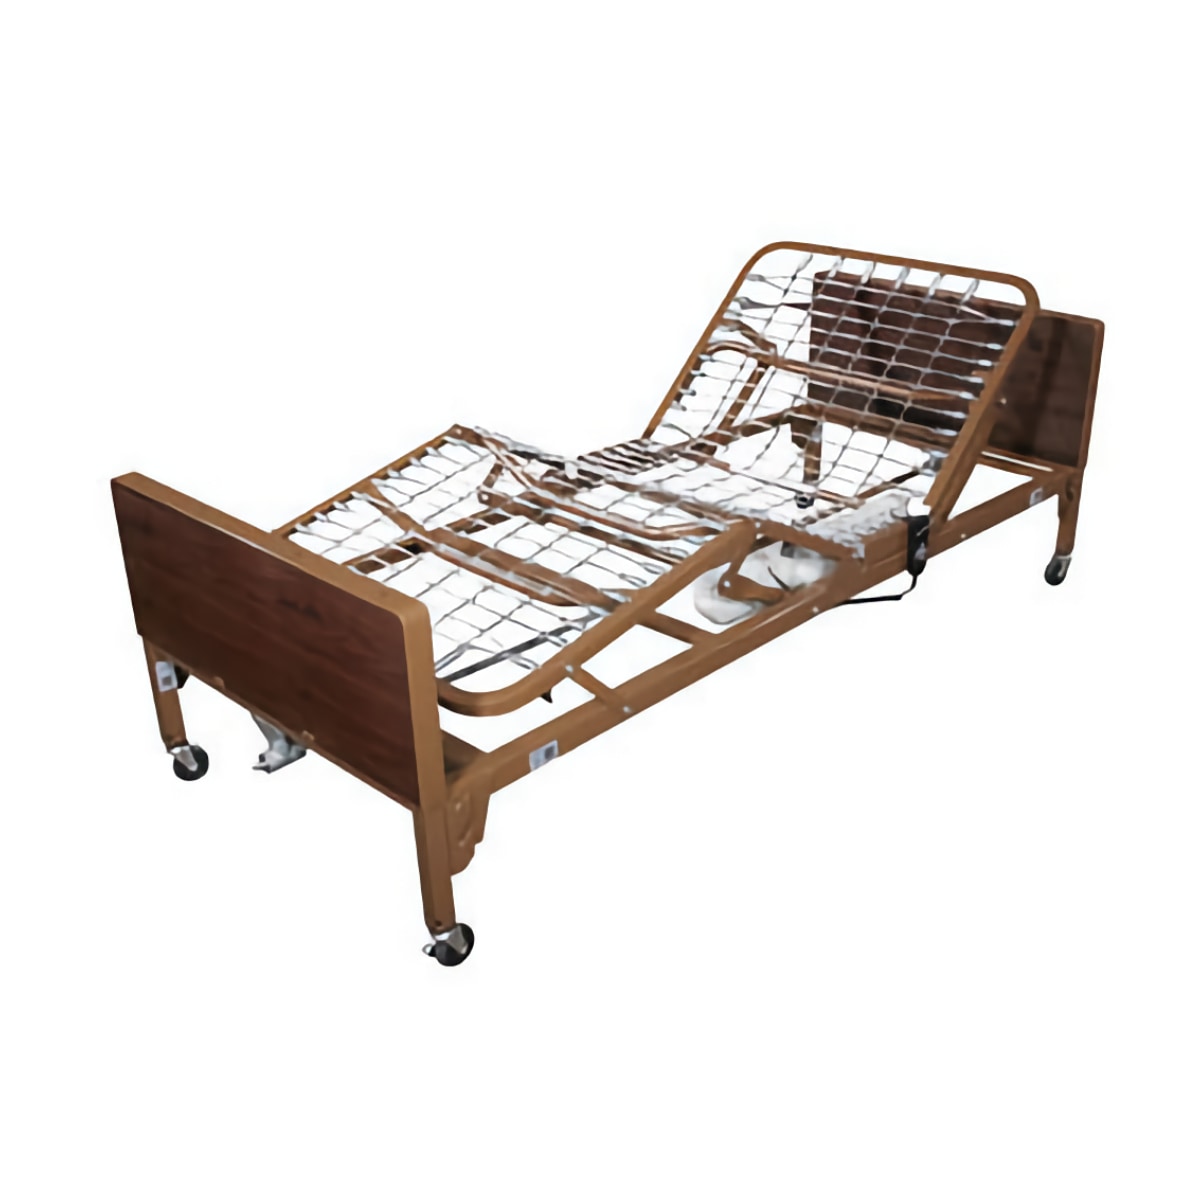 Electric hospital bed wooden frame and coiled mattress base